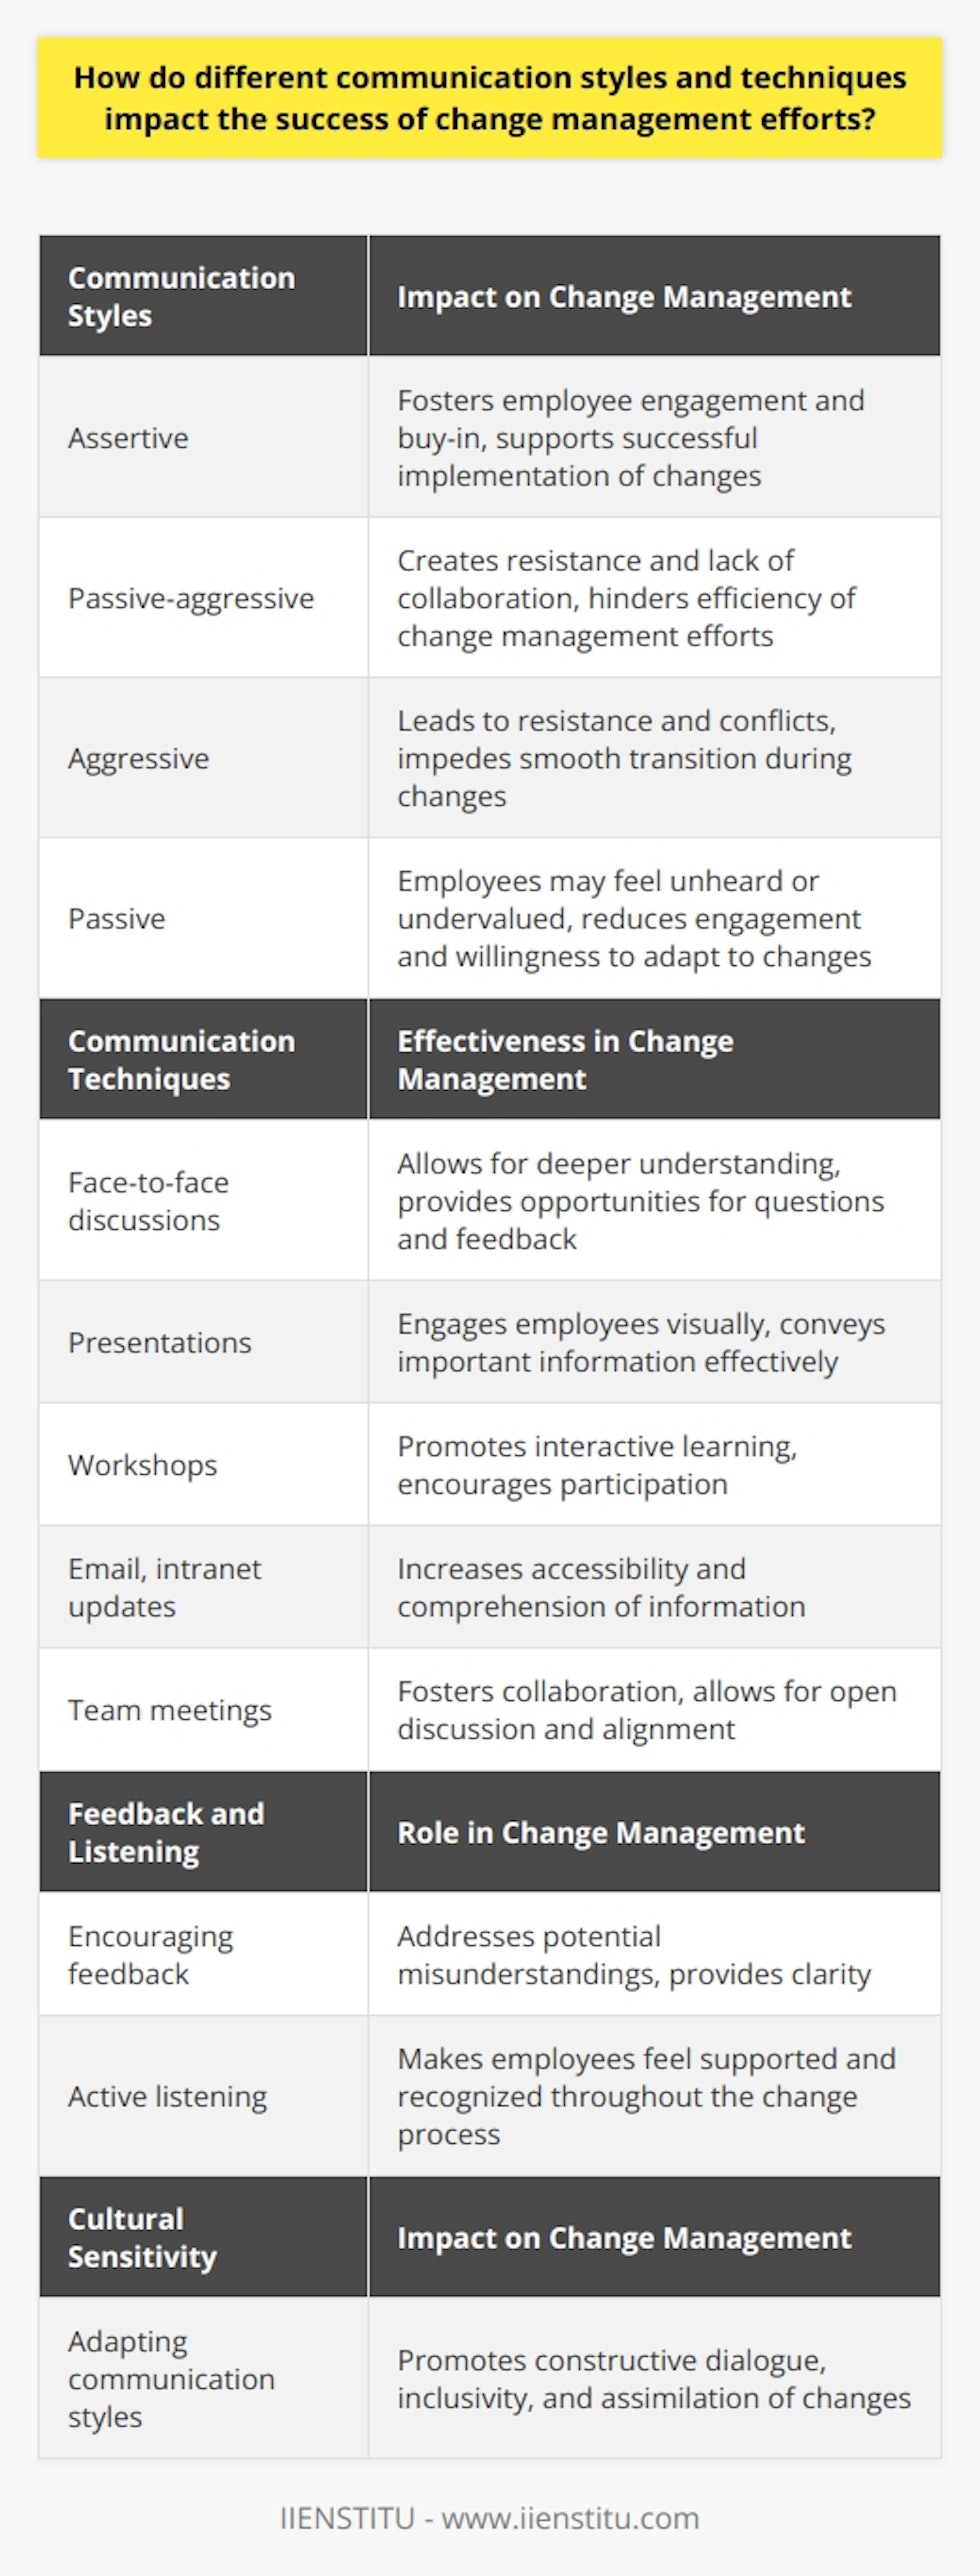 How different communication styles and techniques impact the success of change management efforts can be a crucial aspect of organizational success. Effective communication drives the adoption of new strategies and operations during changes, making it a vital component of change management.Distinct communication styles, such as assertive, passive-aggressive, aggressive, and passive, play a pivotal role in the success of change initiatives. Assertive communication fosters an environment where employees feel valued and confident, enabling them to express their opinions. This leads to enhanced engagement and buy-in from employees, ultimately supporting the successful implementation of changes. On the other hand, aggressive or passive-aggressive communication styles can create resistance or lack of collaboration, hindering the efficiency of change management efforts.Choosing the right techniques is equally important in ensuring the smooth transition of employees during change processes. Face-to-face discussions, presentations, and workshops provide opportunities for deeper understanding and allow employees to ask questions and provide feedback. Employing multiple communication channels, such as email, intranet updates, and team meetings, increases accessibility and comprehension of information. Tailoring the communication techniques to the target audience and the nature of the change enhances the overall effectiveness of the message being delivered.Feedback and active listening are essential elements in the success of change management. Encouraging employees to provide feedback and actively listening to their concerns allows leaders to address potential misunderstandings and provide clarity. Additionally, consistent and timely updates create a strong foundation for change and ensure that employees feel supported and recognized throughout the process.In change management, it is crucial to be culturally sensitive and mindful of cultural differences within the organization. Adapting communication styles to accommodate diverse teams allows for constructive dialogue, promotes inclusivity, and facilitates the assimilation of changes across the workforce.In conclusion, understanding and employing different communication styles and techniques significantly impact the success of change management efforts. By adopting an assertive communication style, selecting appropriate techniques, promoting feedback and listening, and considering cultural factors, organizations can effectively navigate change and increase the likelihood of achieving desired outcomes. Effective communication plays a vital role in successful change management.